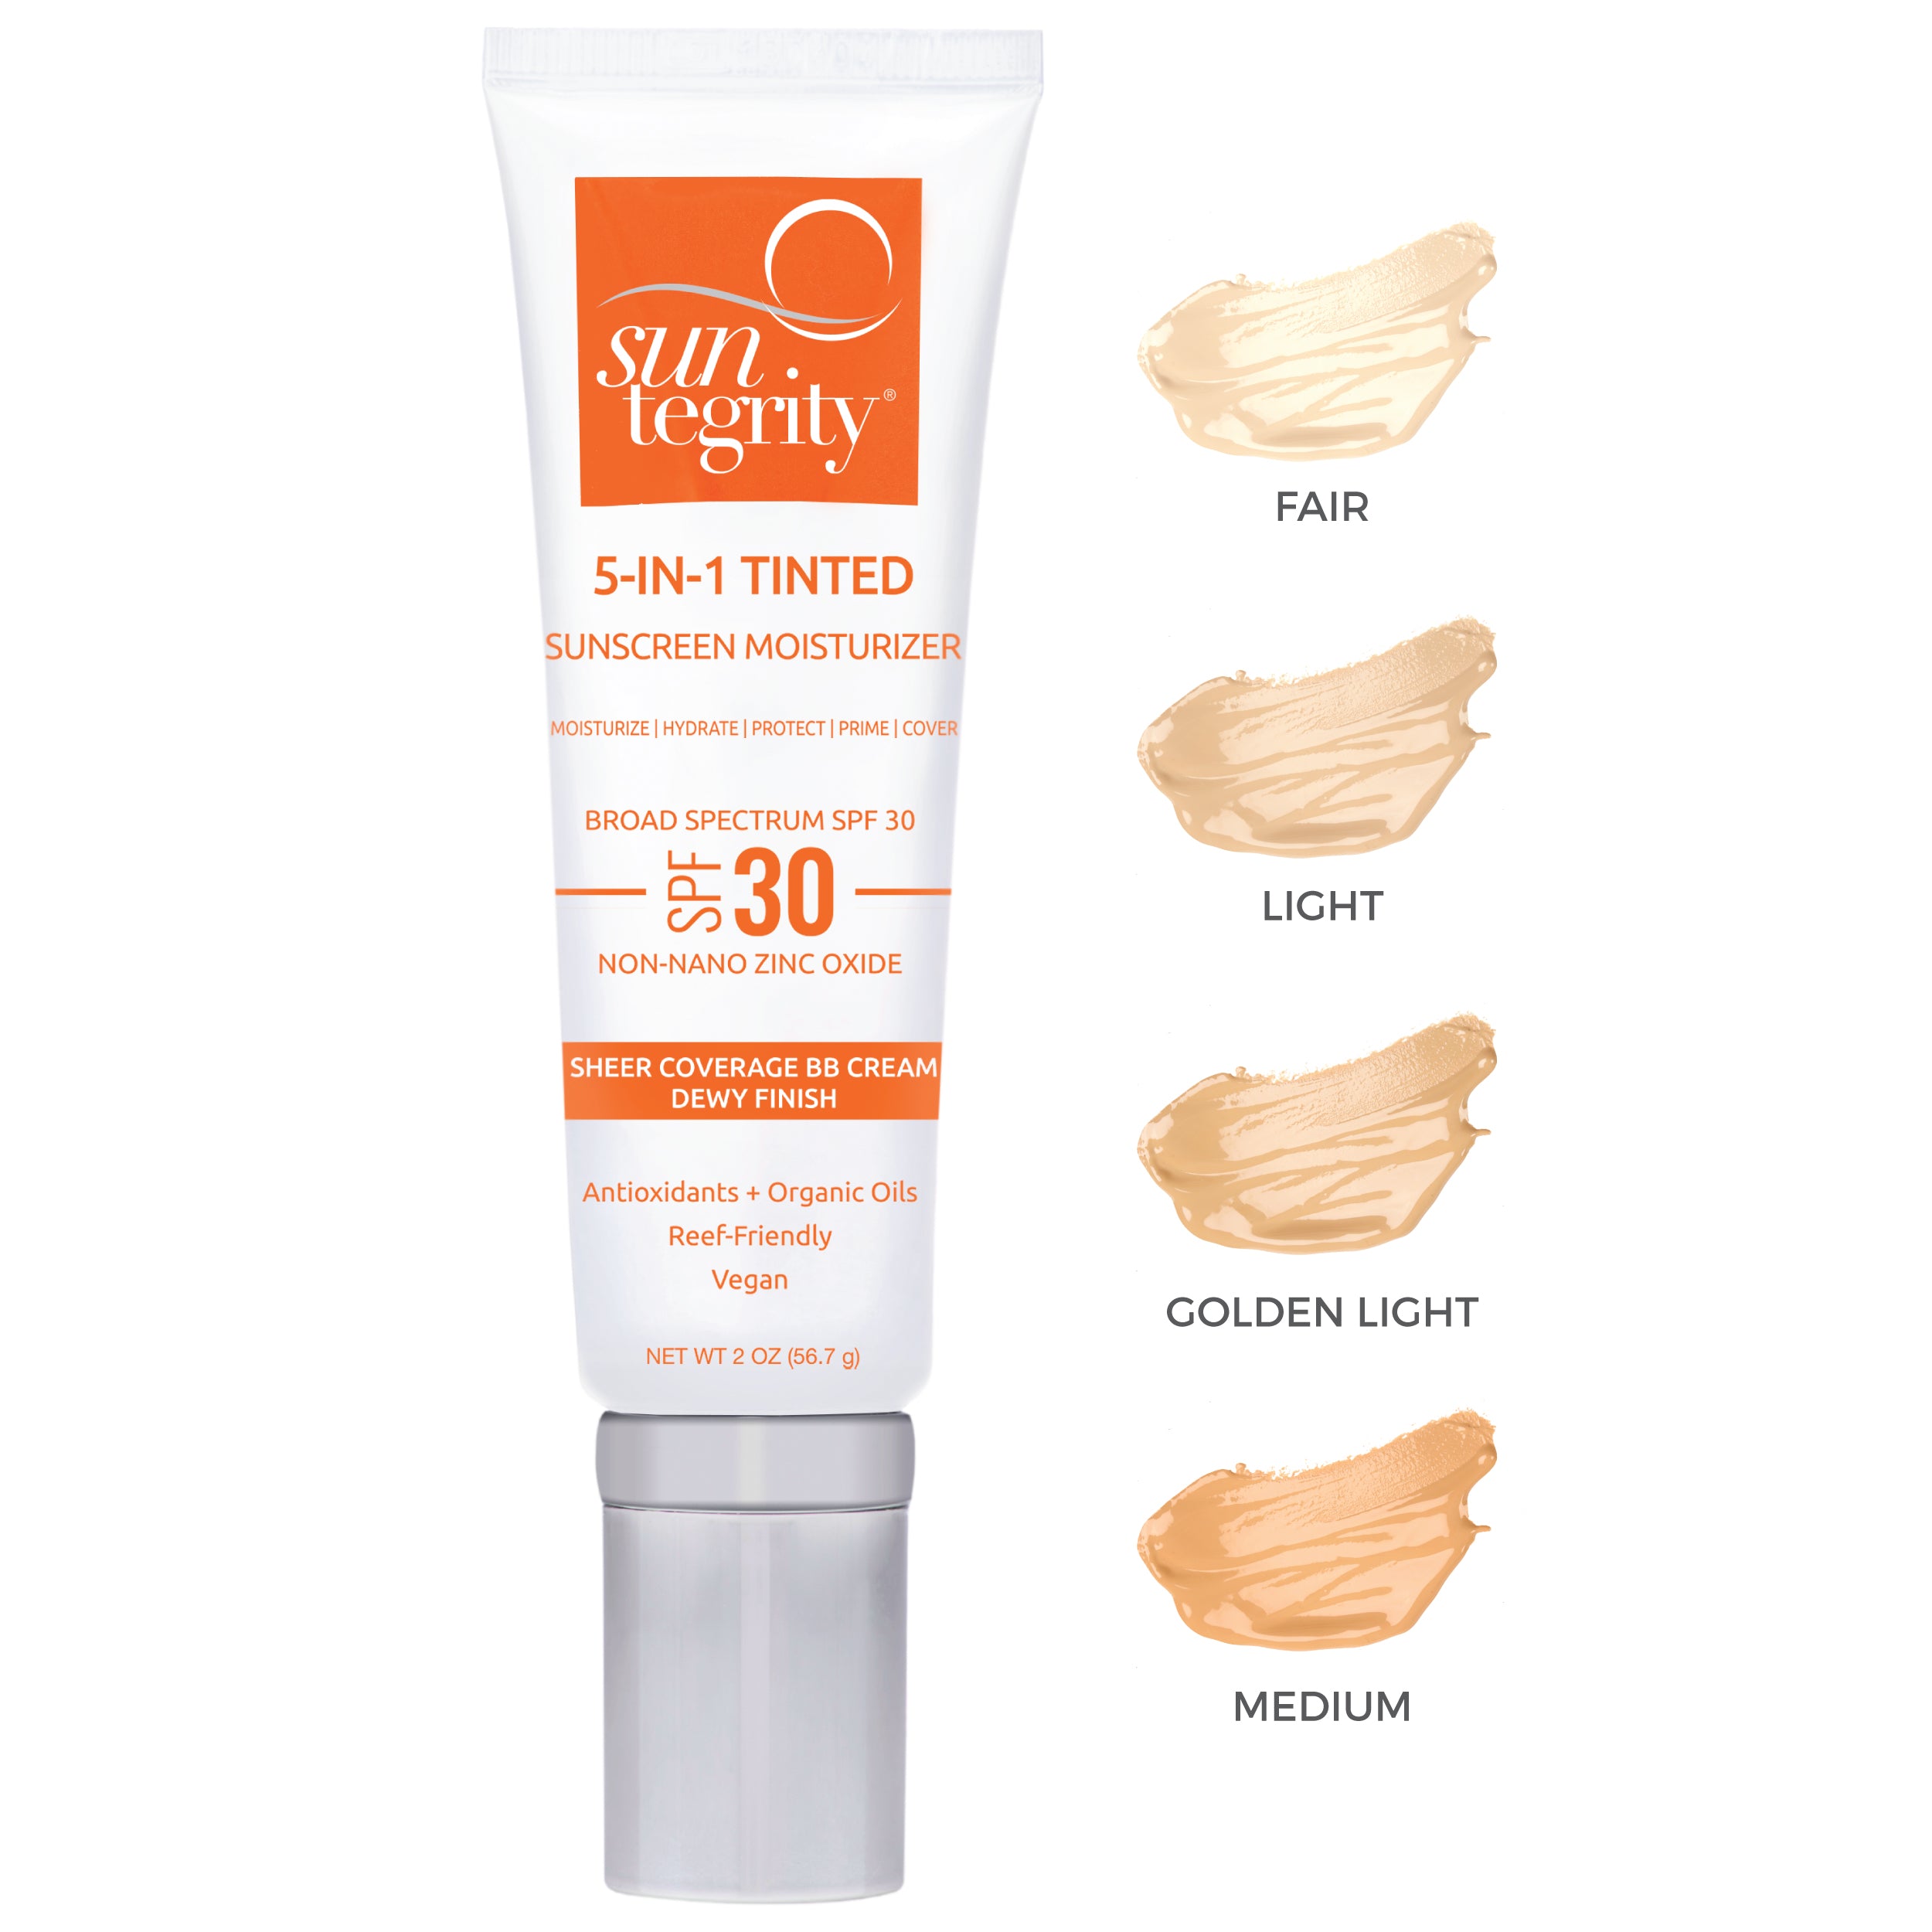 
  
  Suntegrity 5-in-1 Tinted Broad Spectrum Sunscreen SPF 30
  
